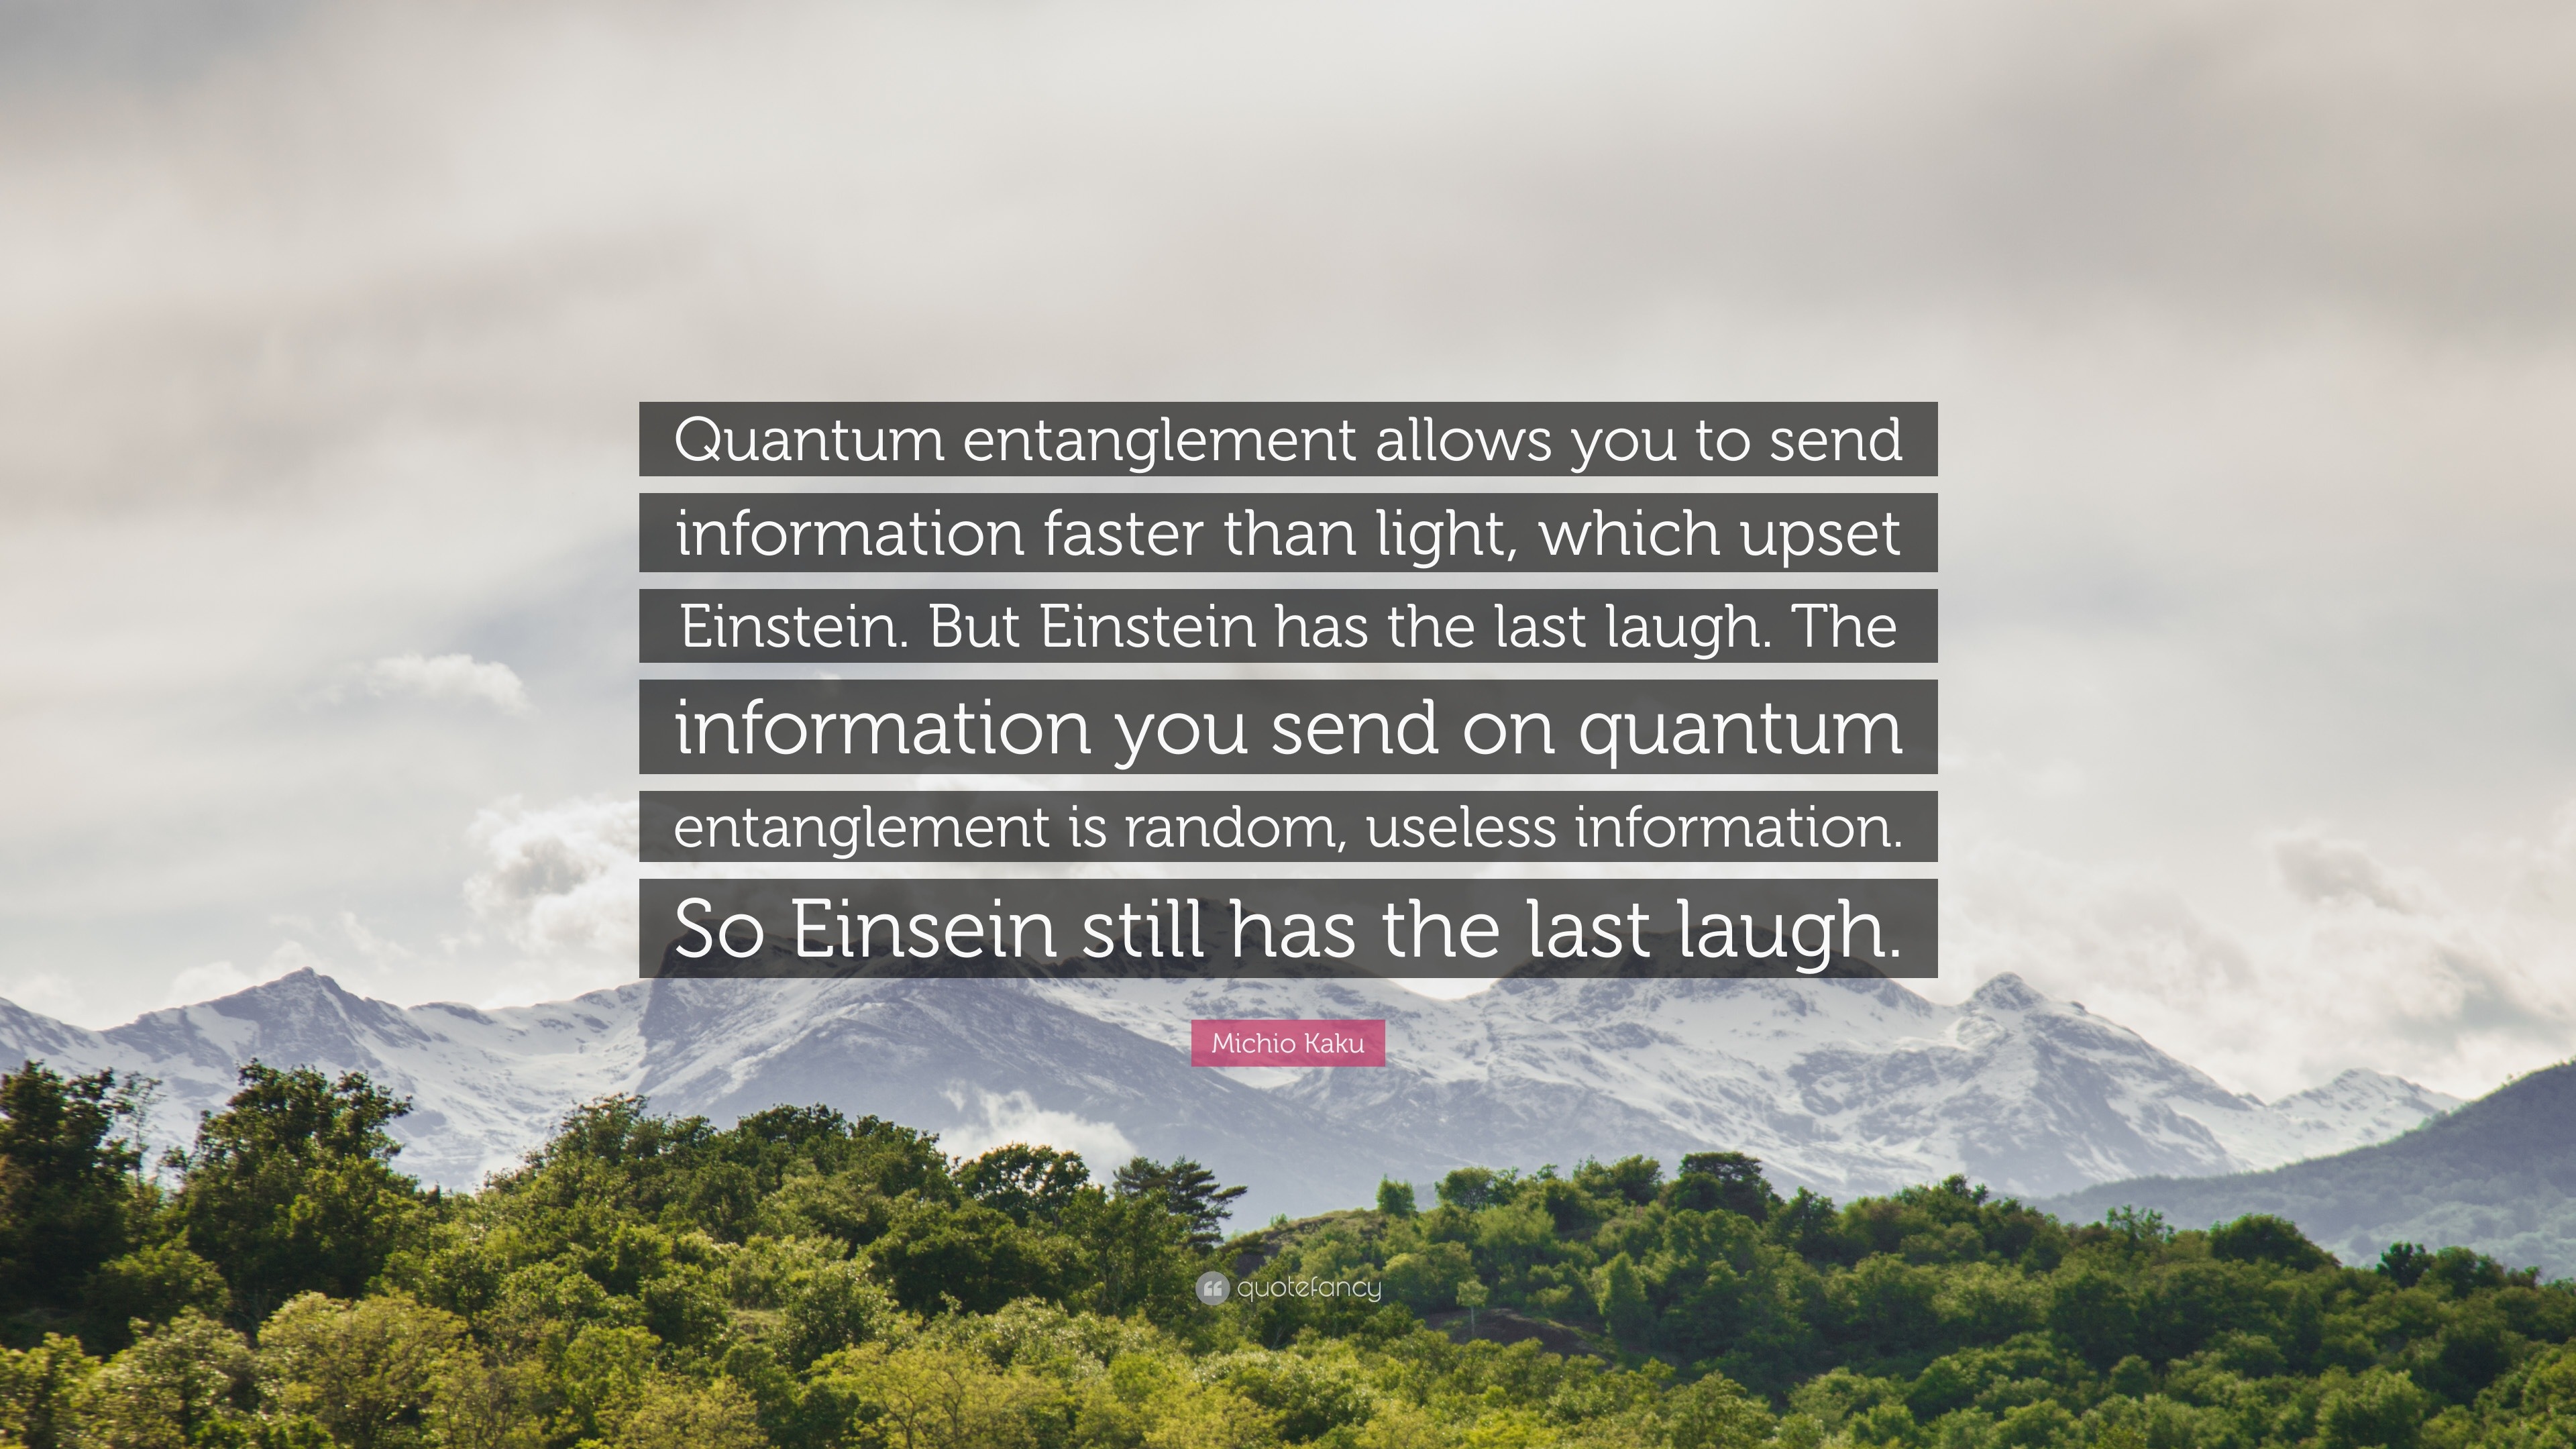 Michio Kaku Quote Quantum Entanglement Allows You To Send Information Faster Than Light Which Upset Einstein But Einstein Has The Last L 7 Wallpapers Quotefancy